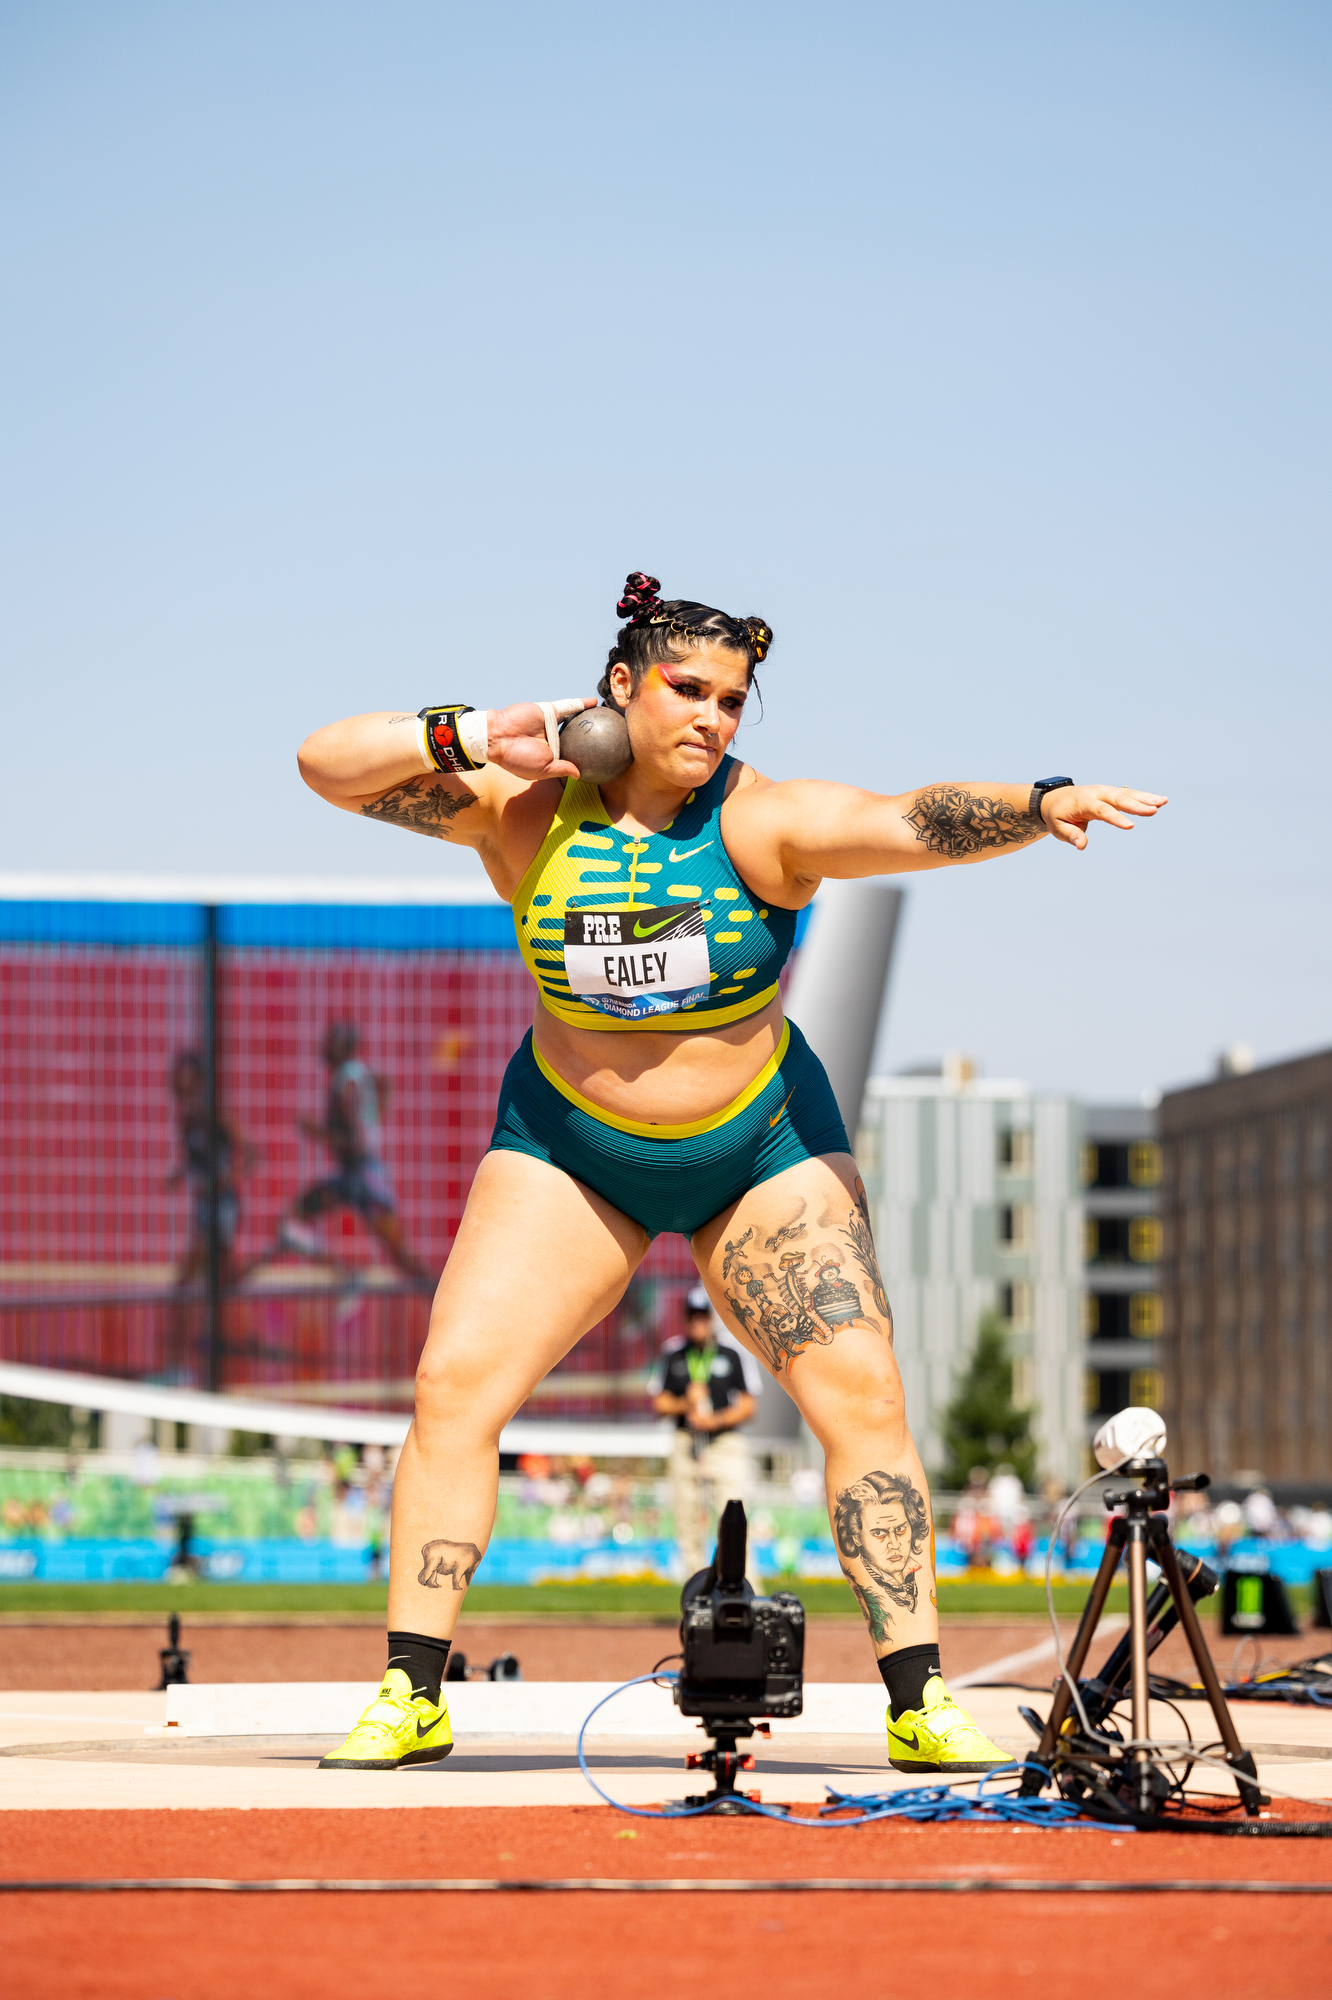 Chase Ealey of the United States competes in the women’s shot put at the Prefontaine Classic track and field meet on Saturday, Sept. 16, 2023, at Hayward Field in Eugene. Ealey won the event, setting a new American record with a throw of 68 feet, 1½ inches.